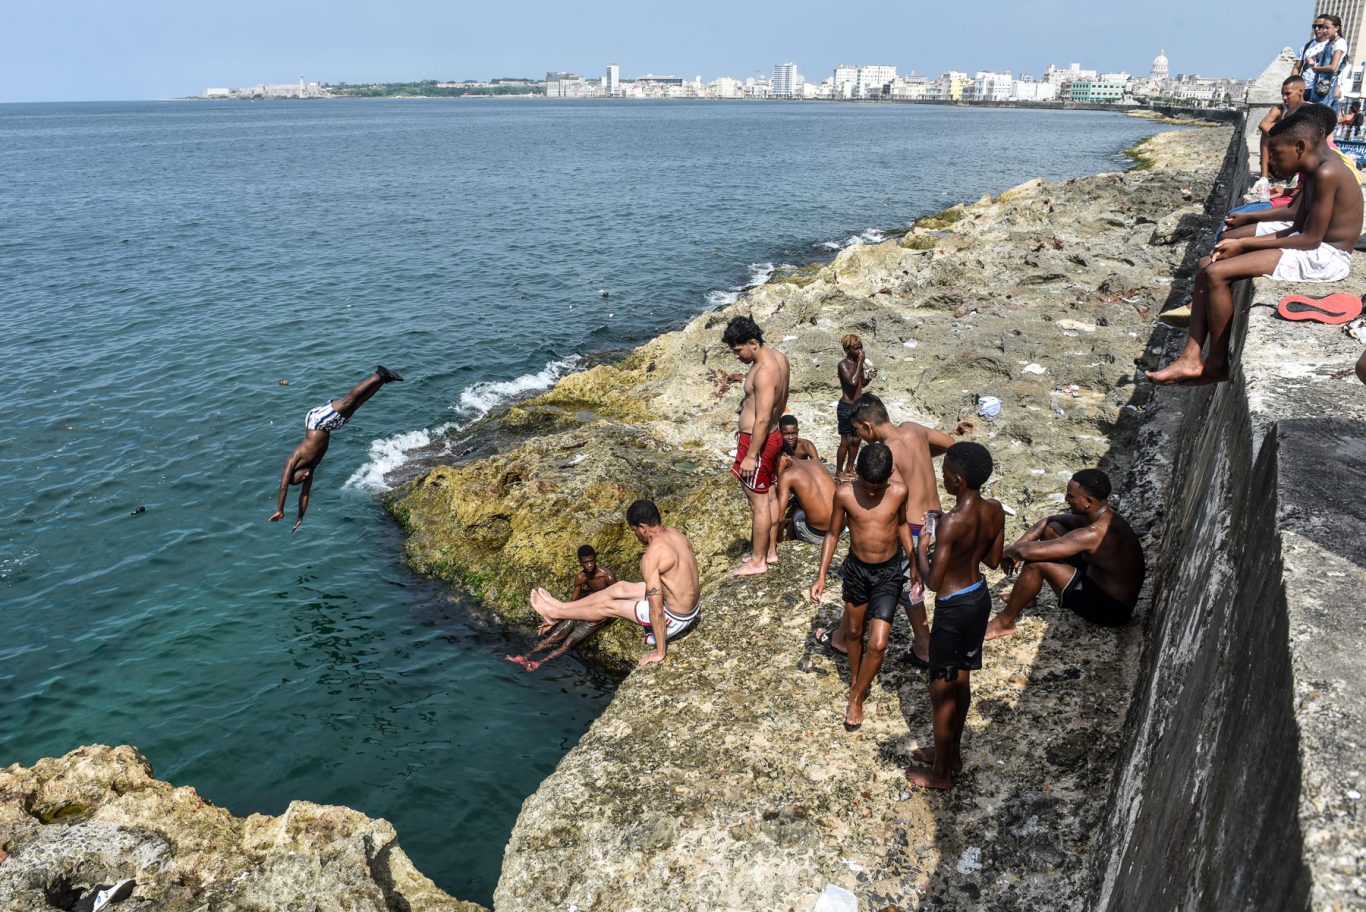 Havana’s Malecón boardwalk’s bathers are part of the iconic image of the place. Photo: Kaloian.